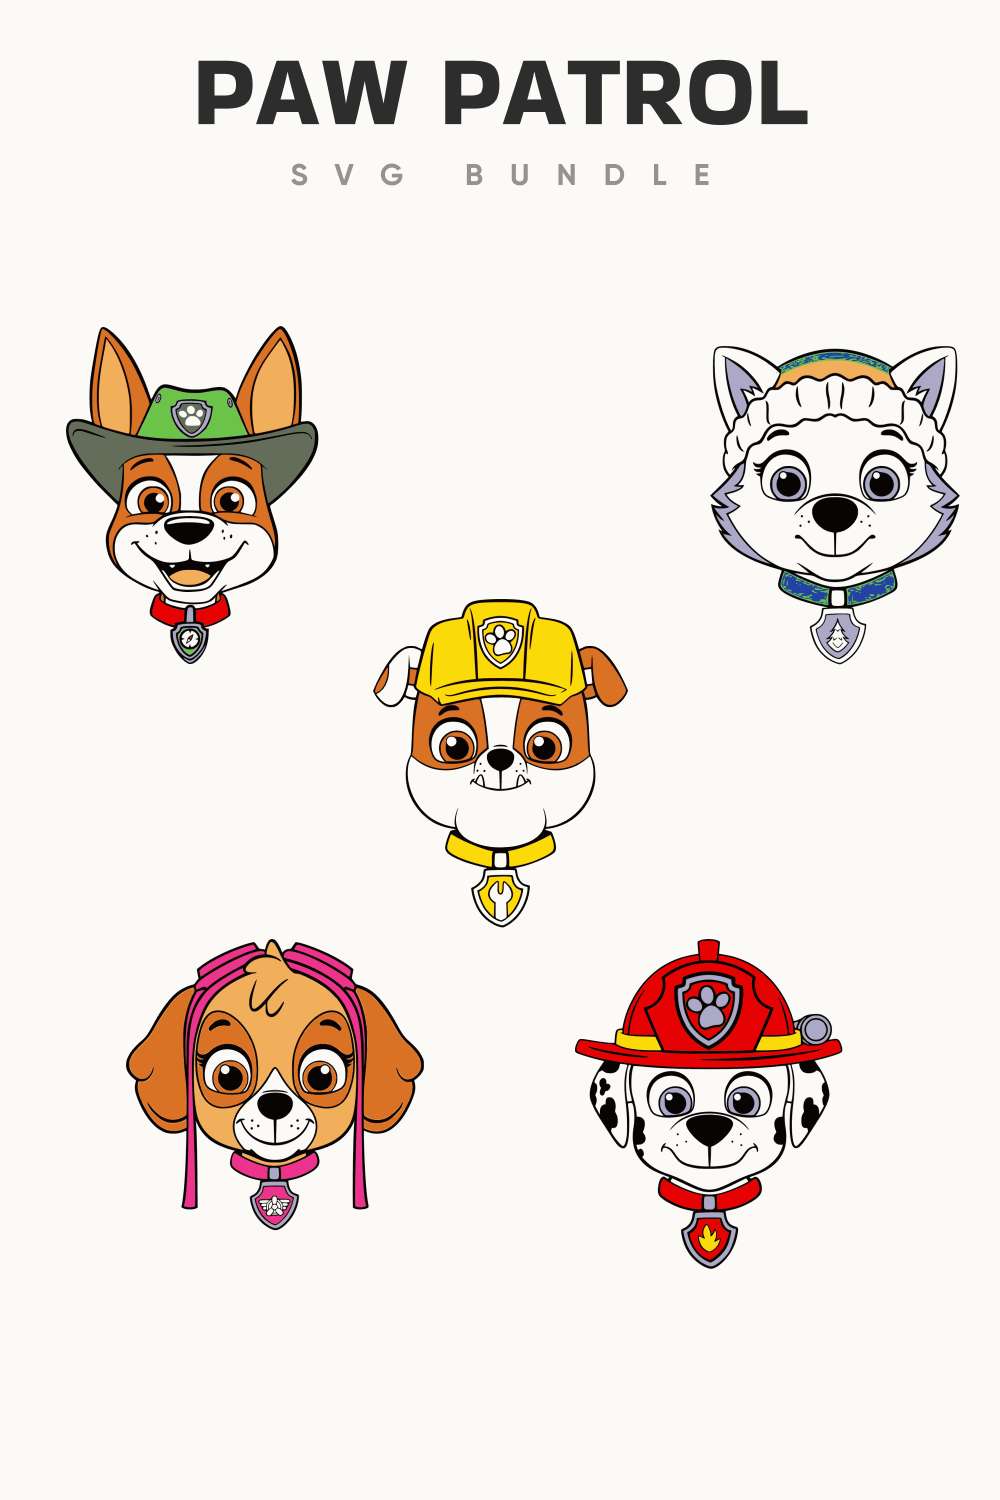 All characters of the paw patrol.